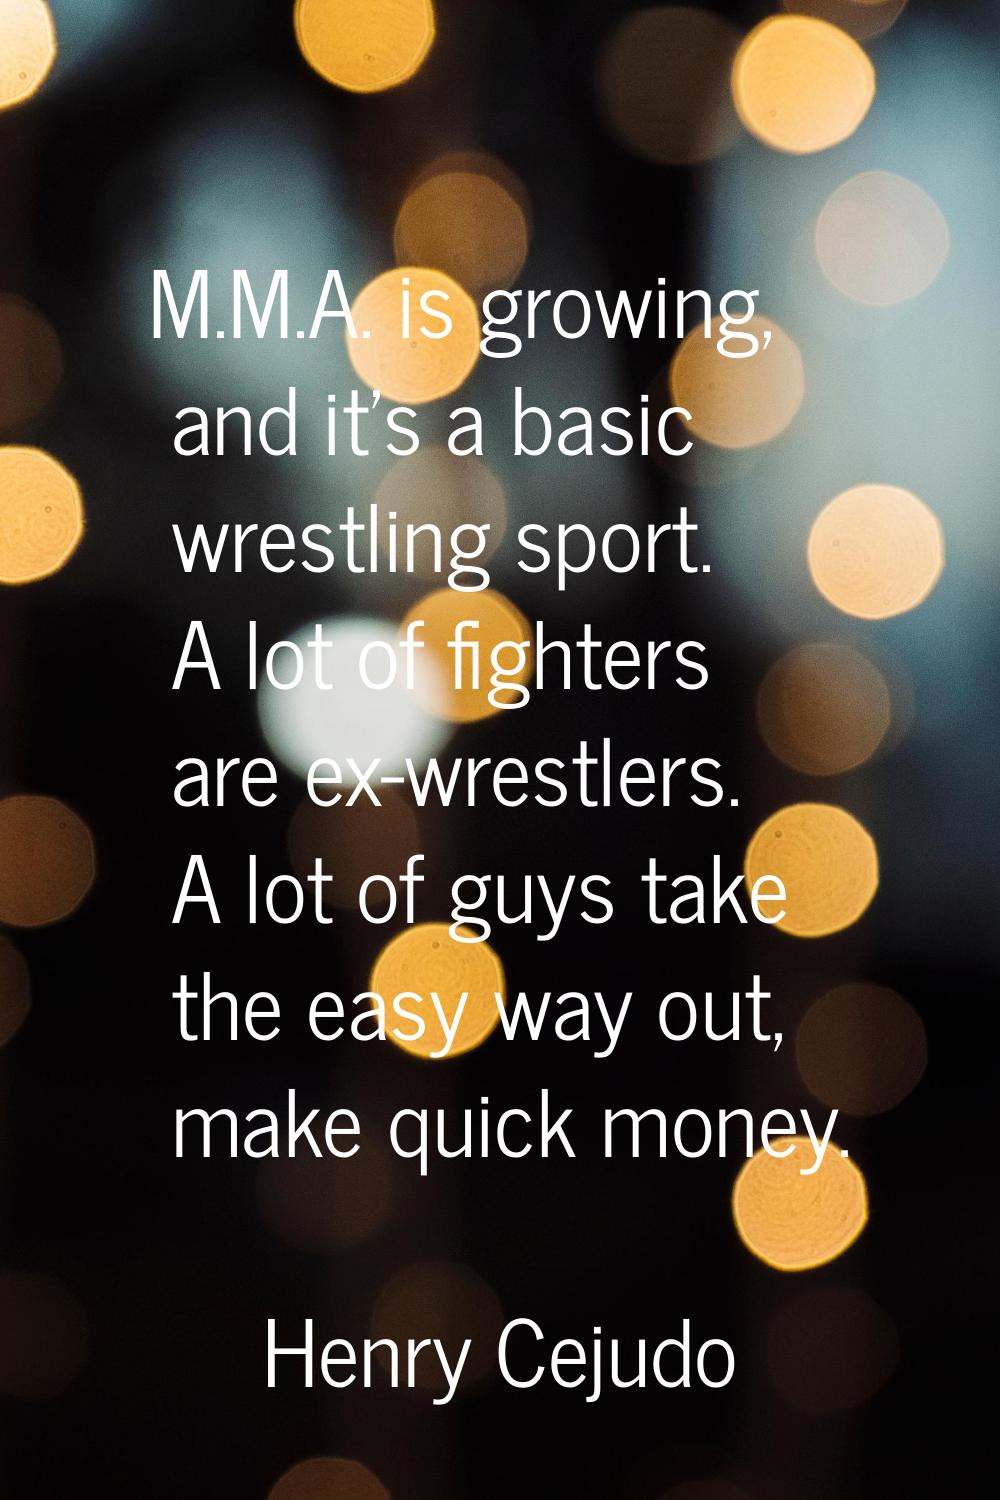 M.M.A. is growing, and it's a basic wrestling sport. A lot of fighters are ex-wrestlers. A lot of g